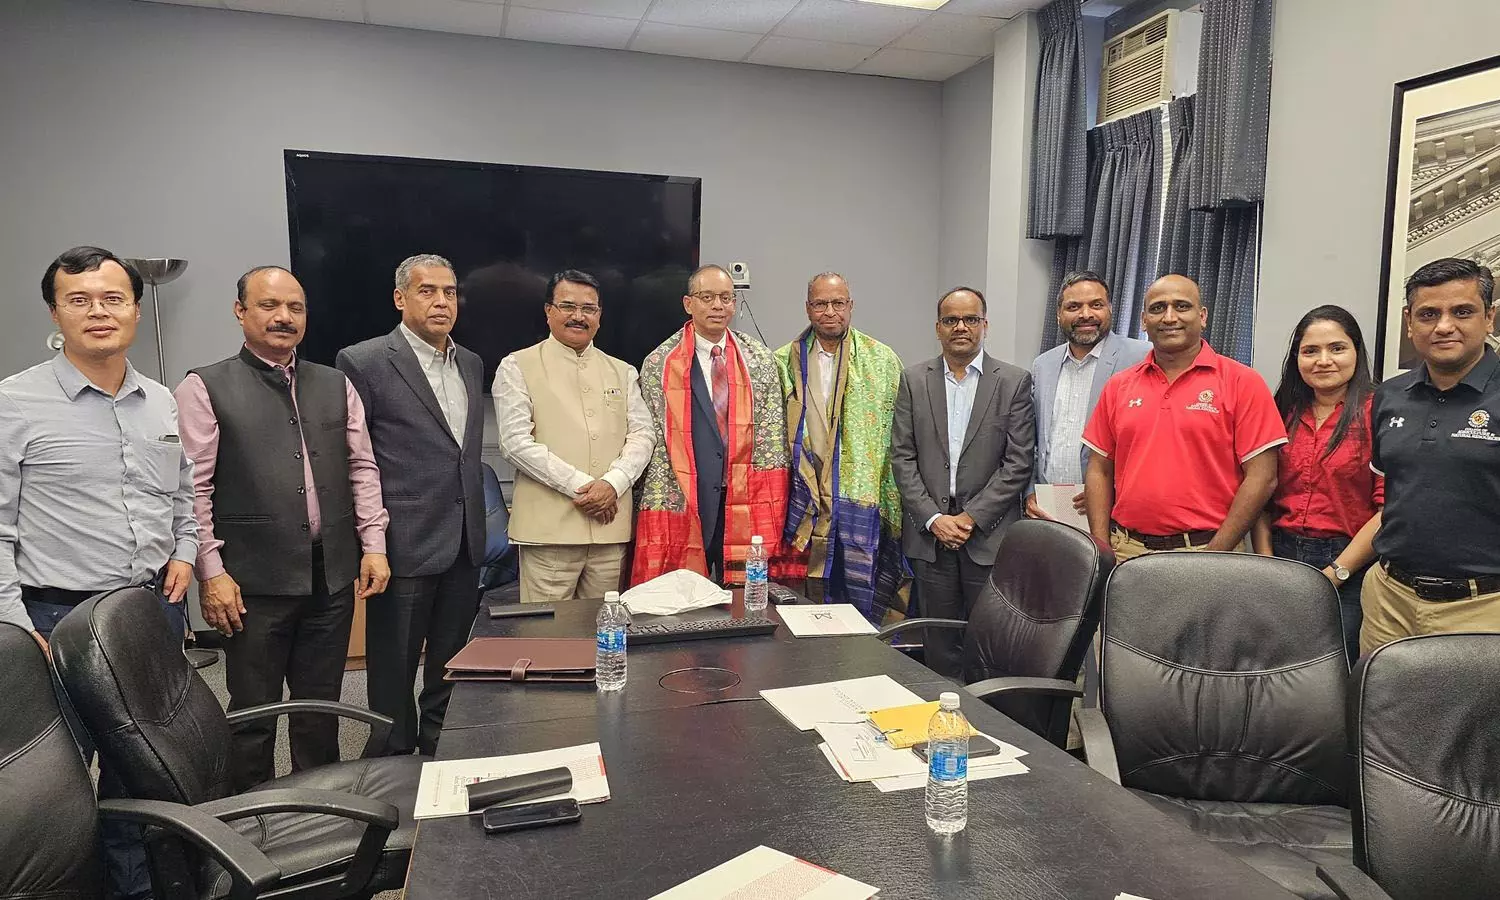 Telangana Govt discusses student exchange programme for agriculture development with Maryland University